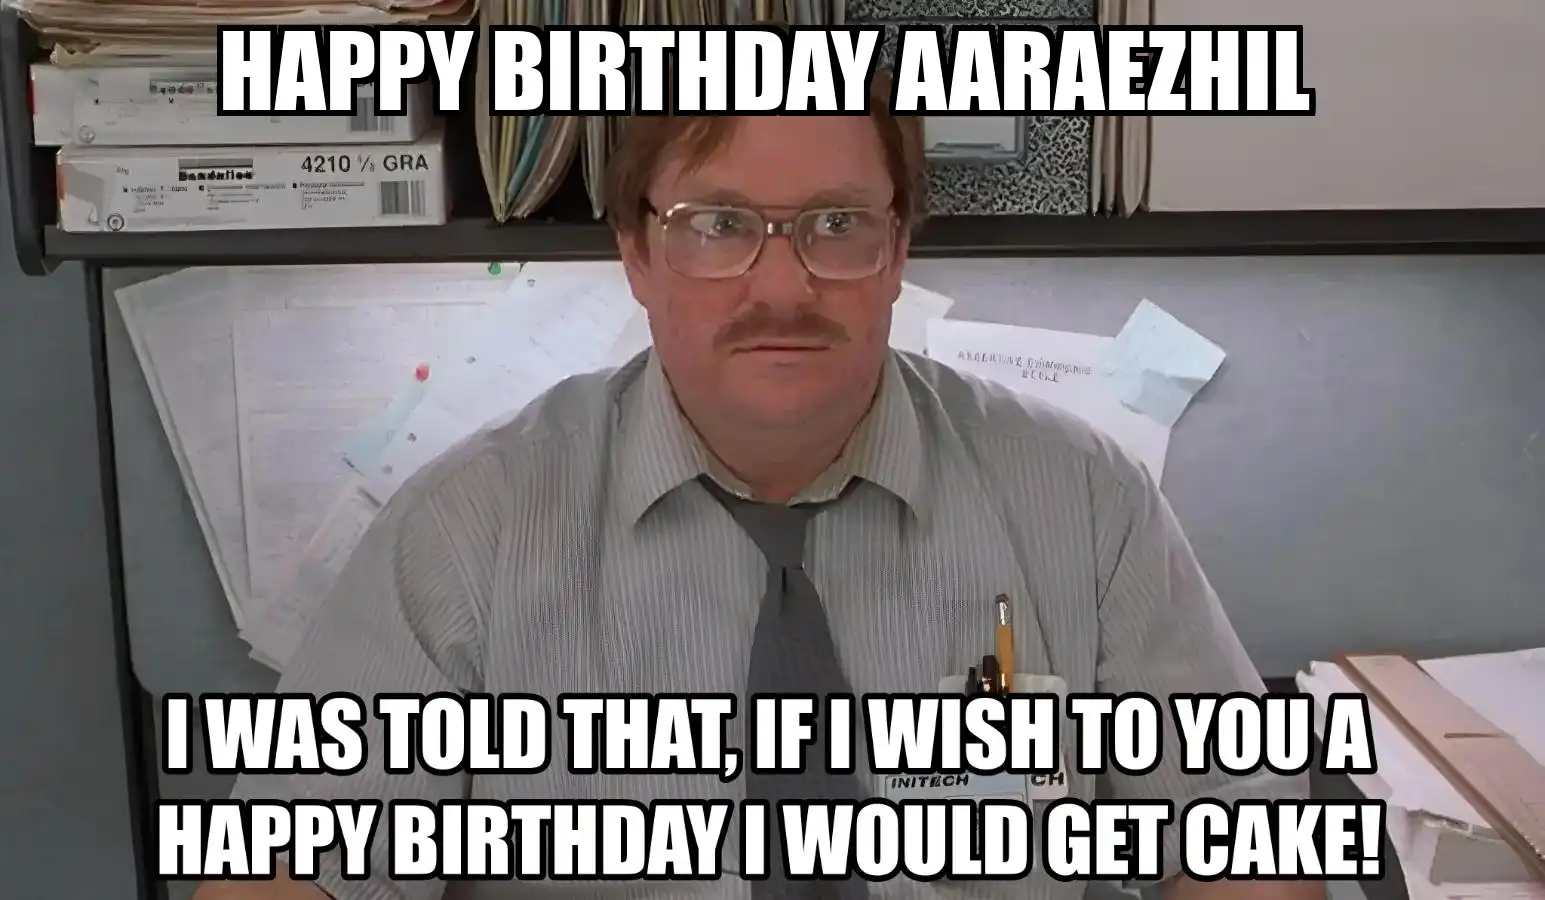 Happy Birthday Aaraezhil I Would Get A Cake Meme